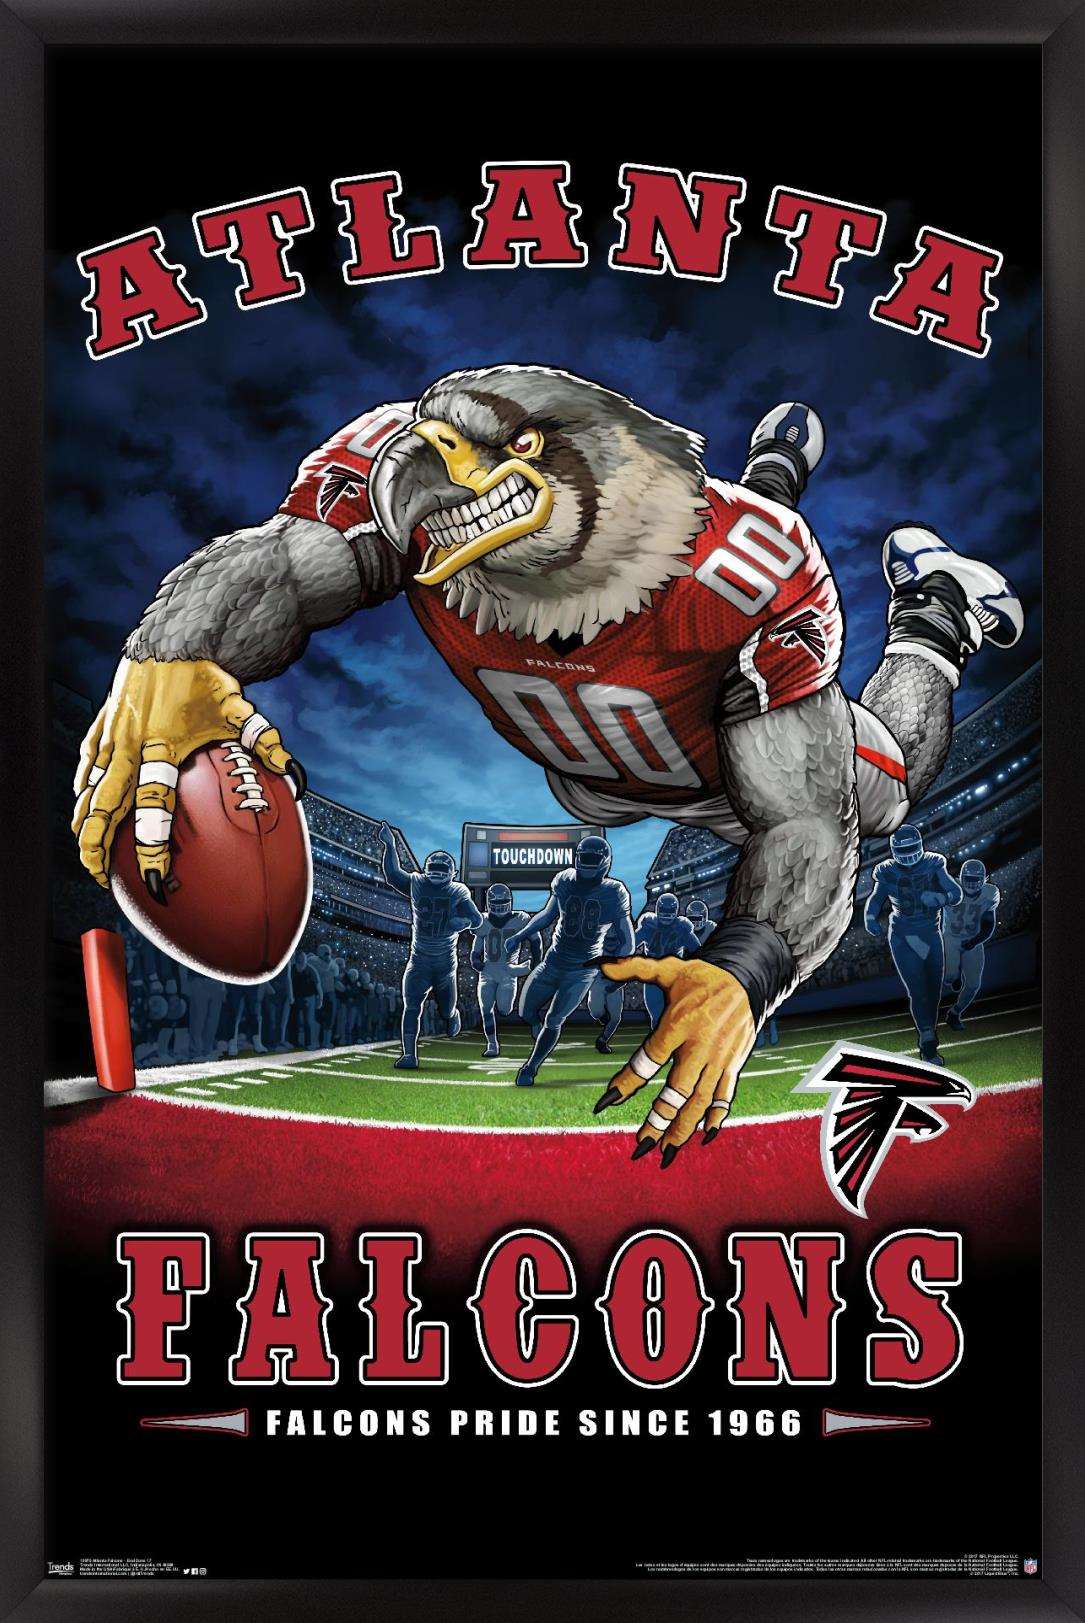 NFL Atlanta Falcons - End Zone 17 Wall Poster, 14.725" x 22.375", Framed - image 1 of 5